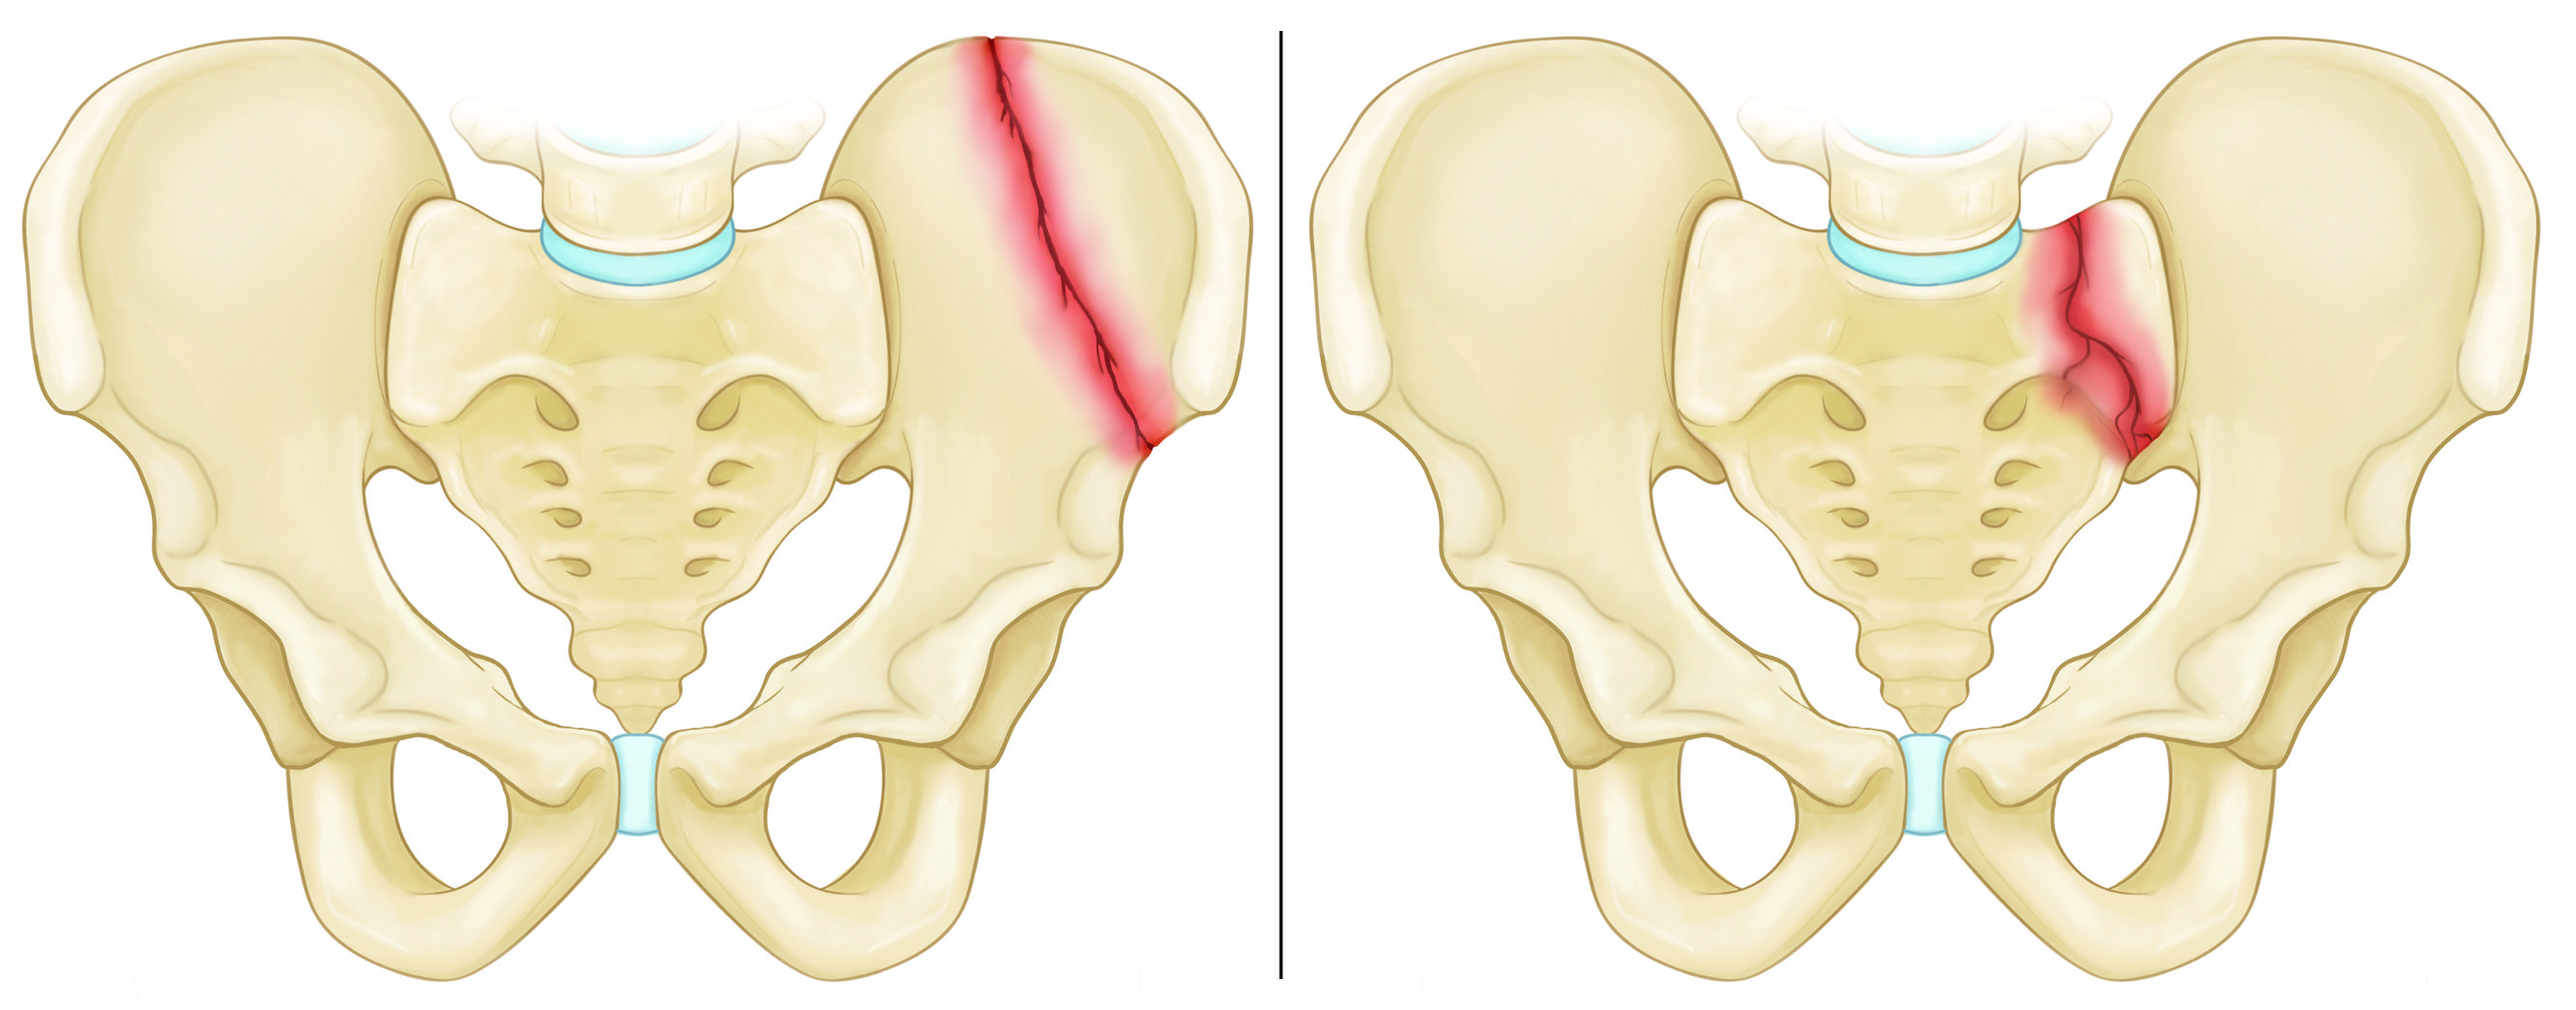 pelvic fracture physiotherapy